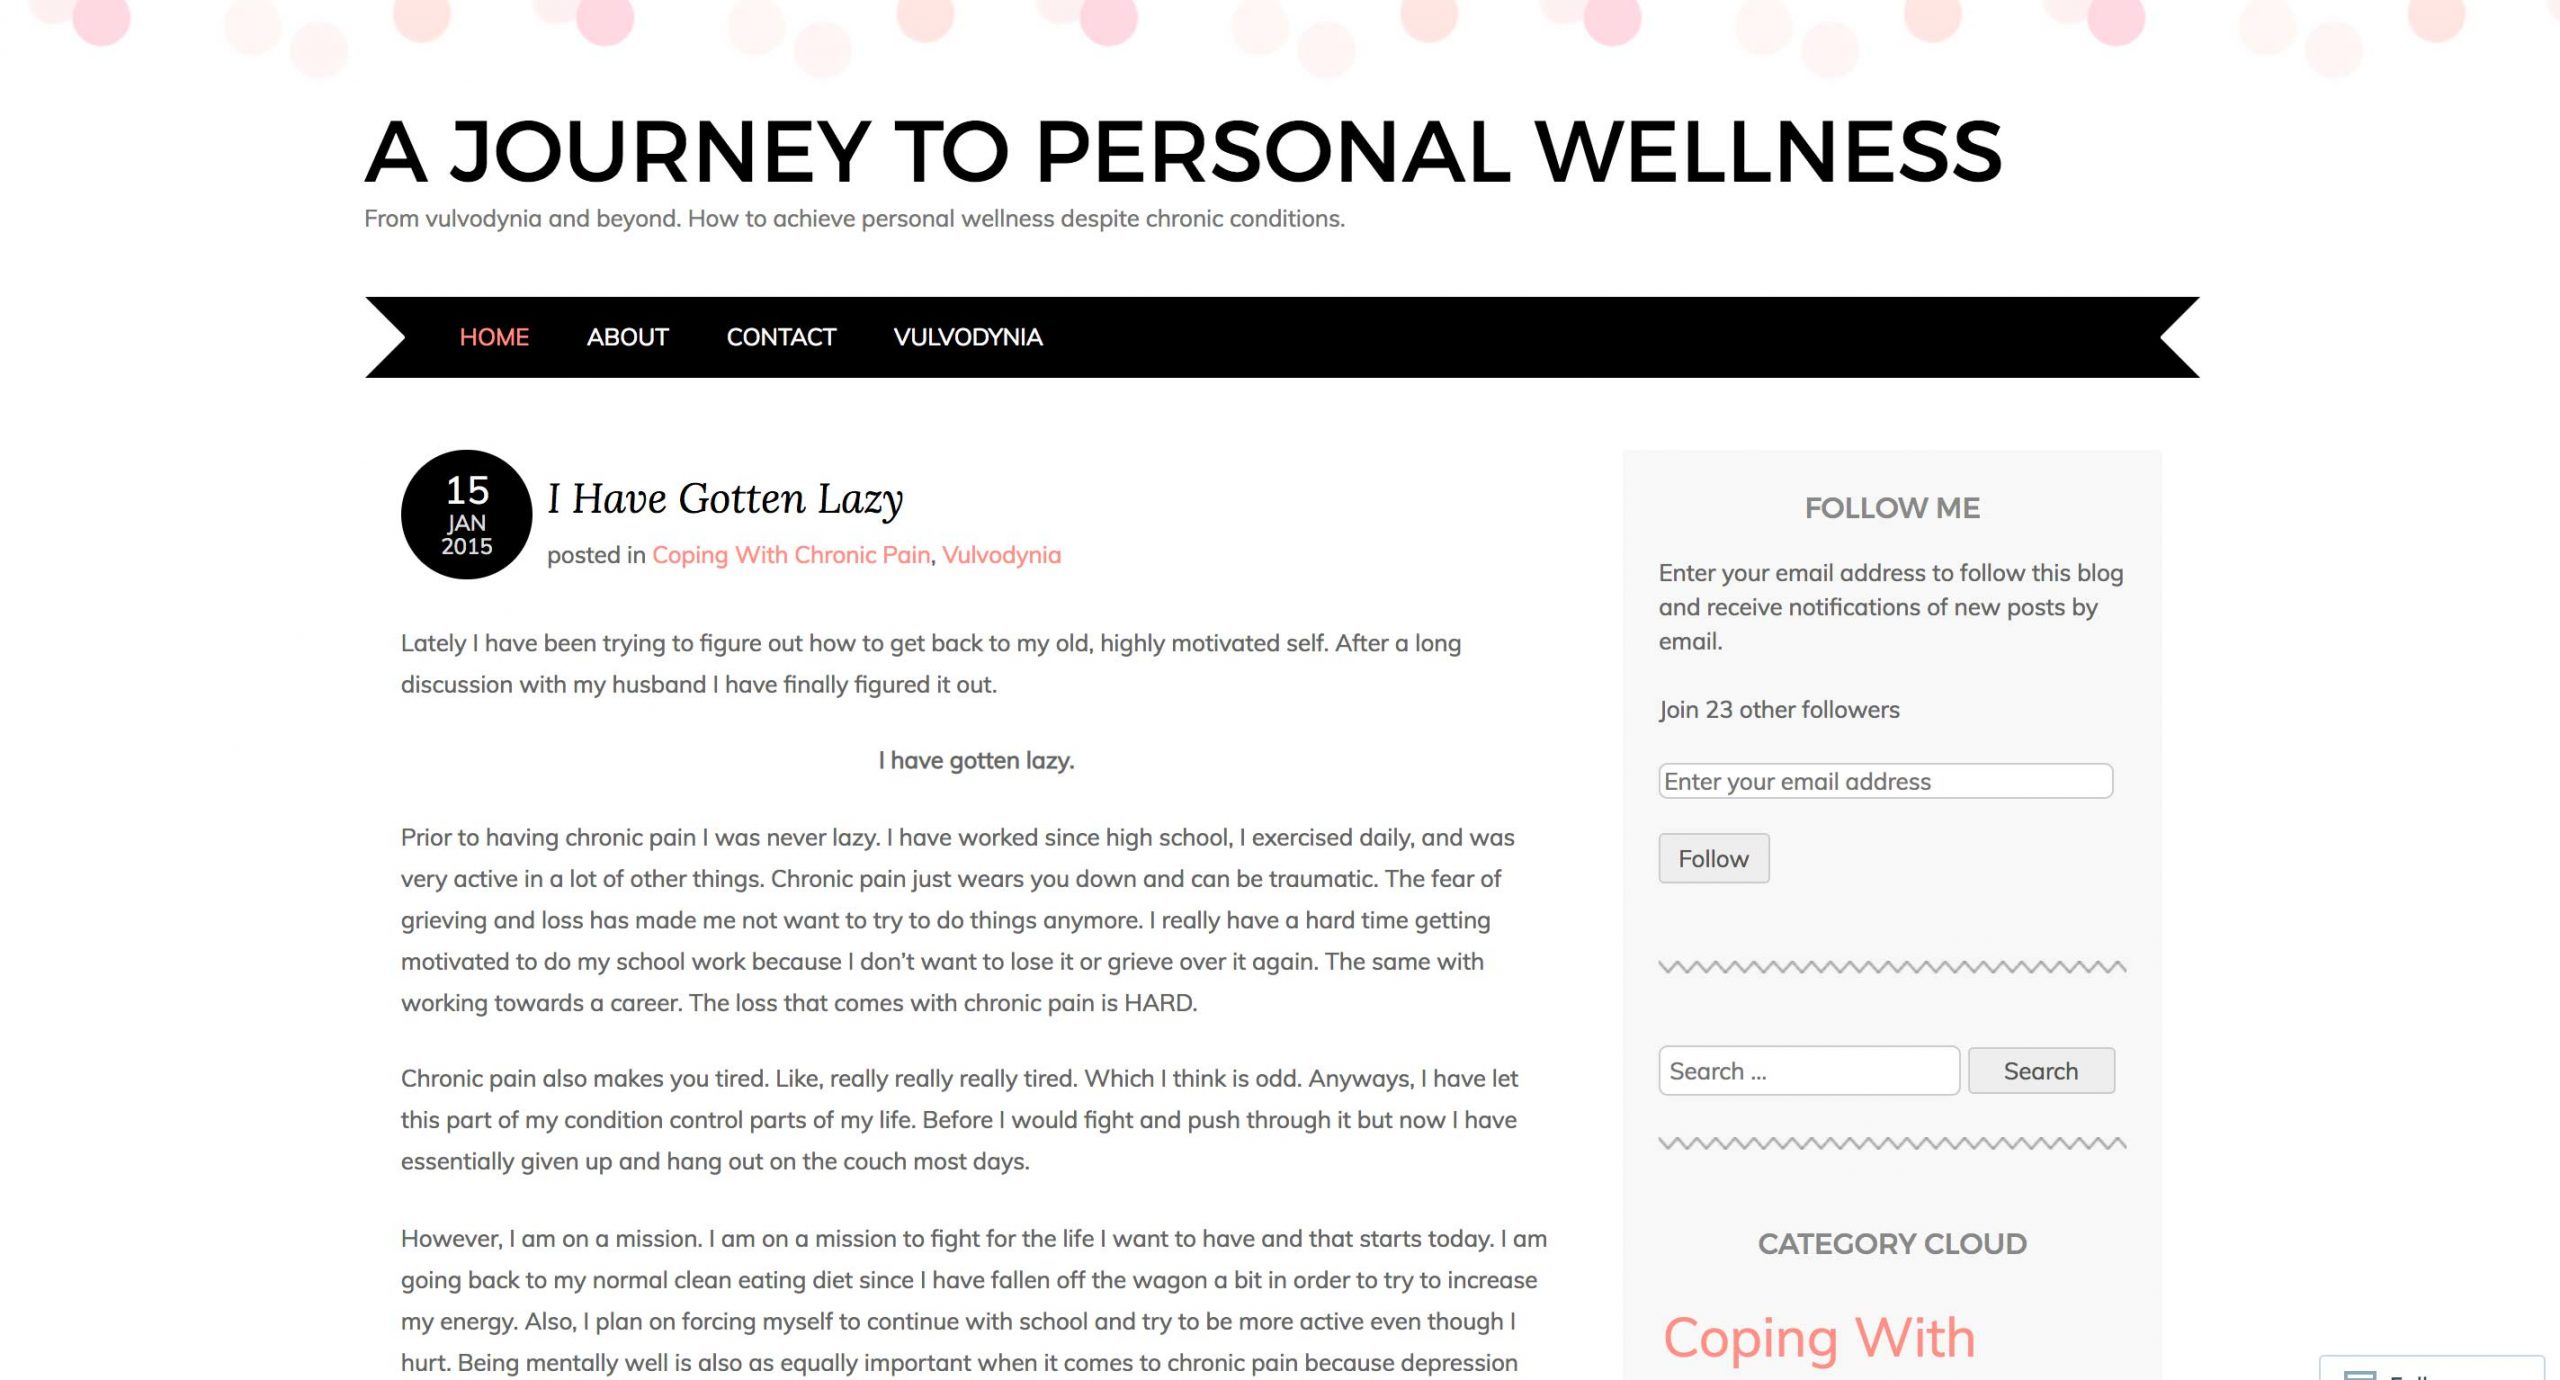 A Journal To Personal Wellness - blog about vulvodynia and chronic pain